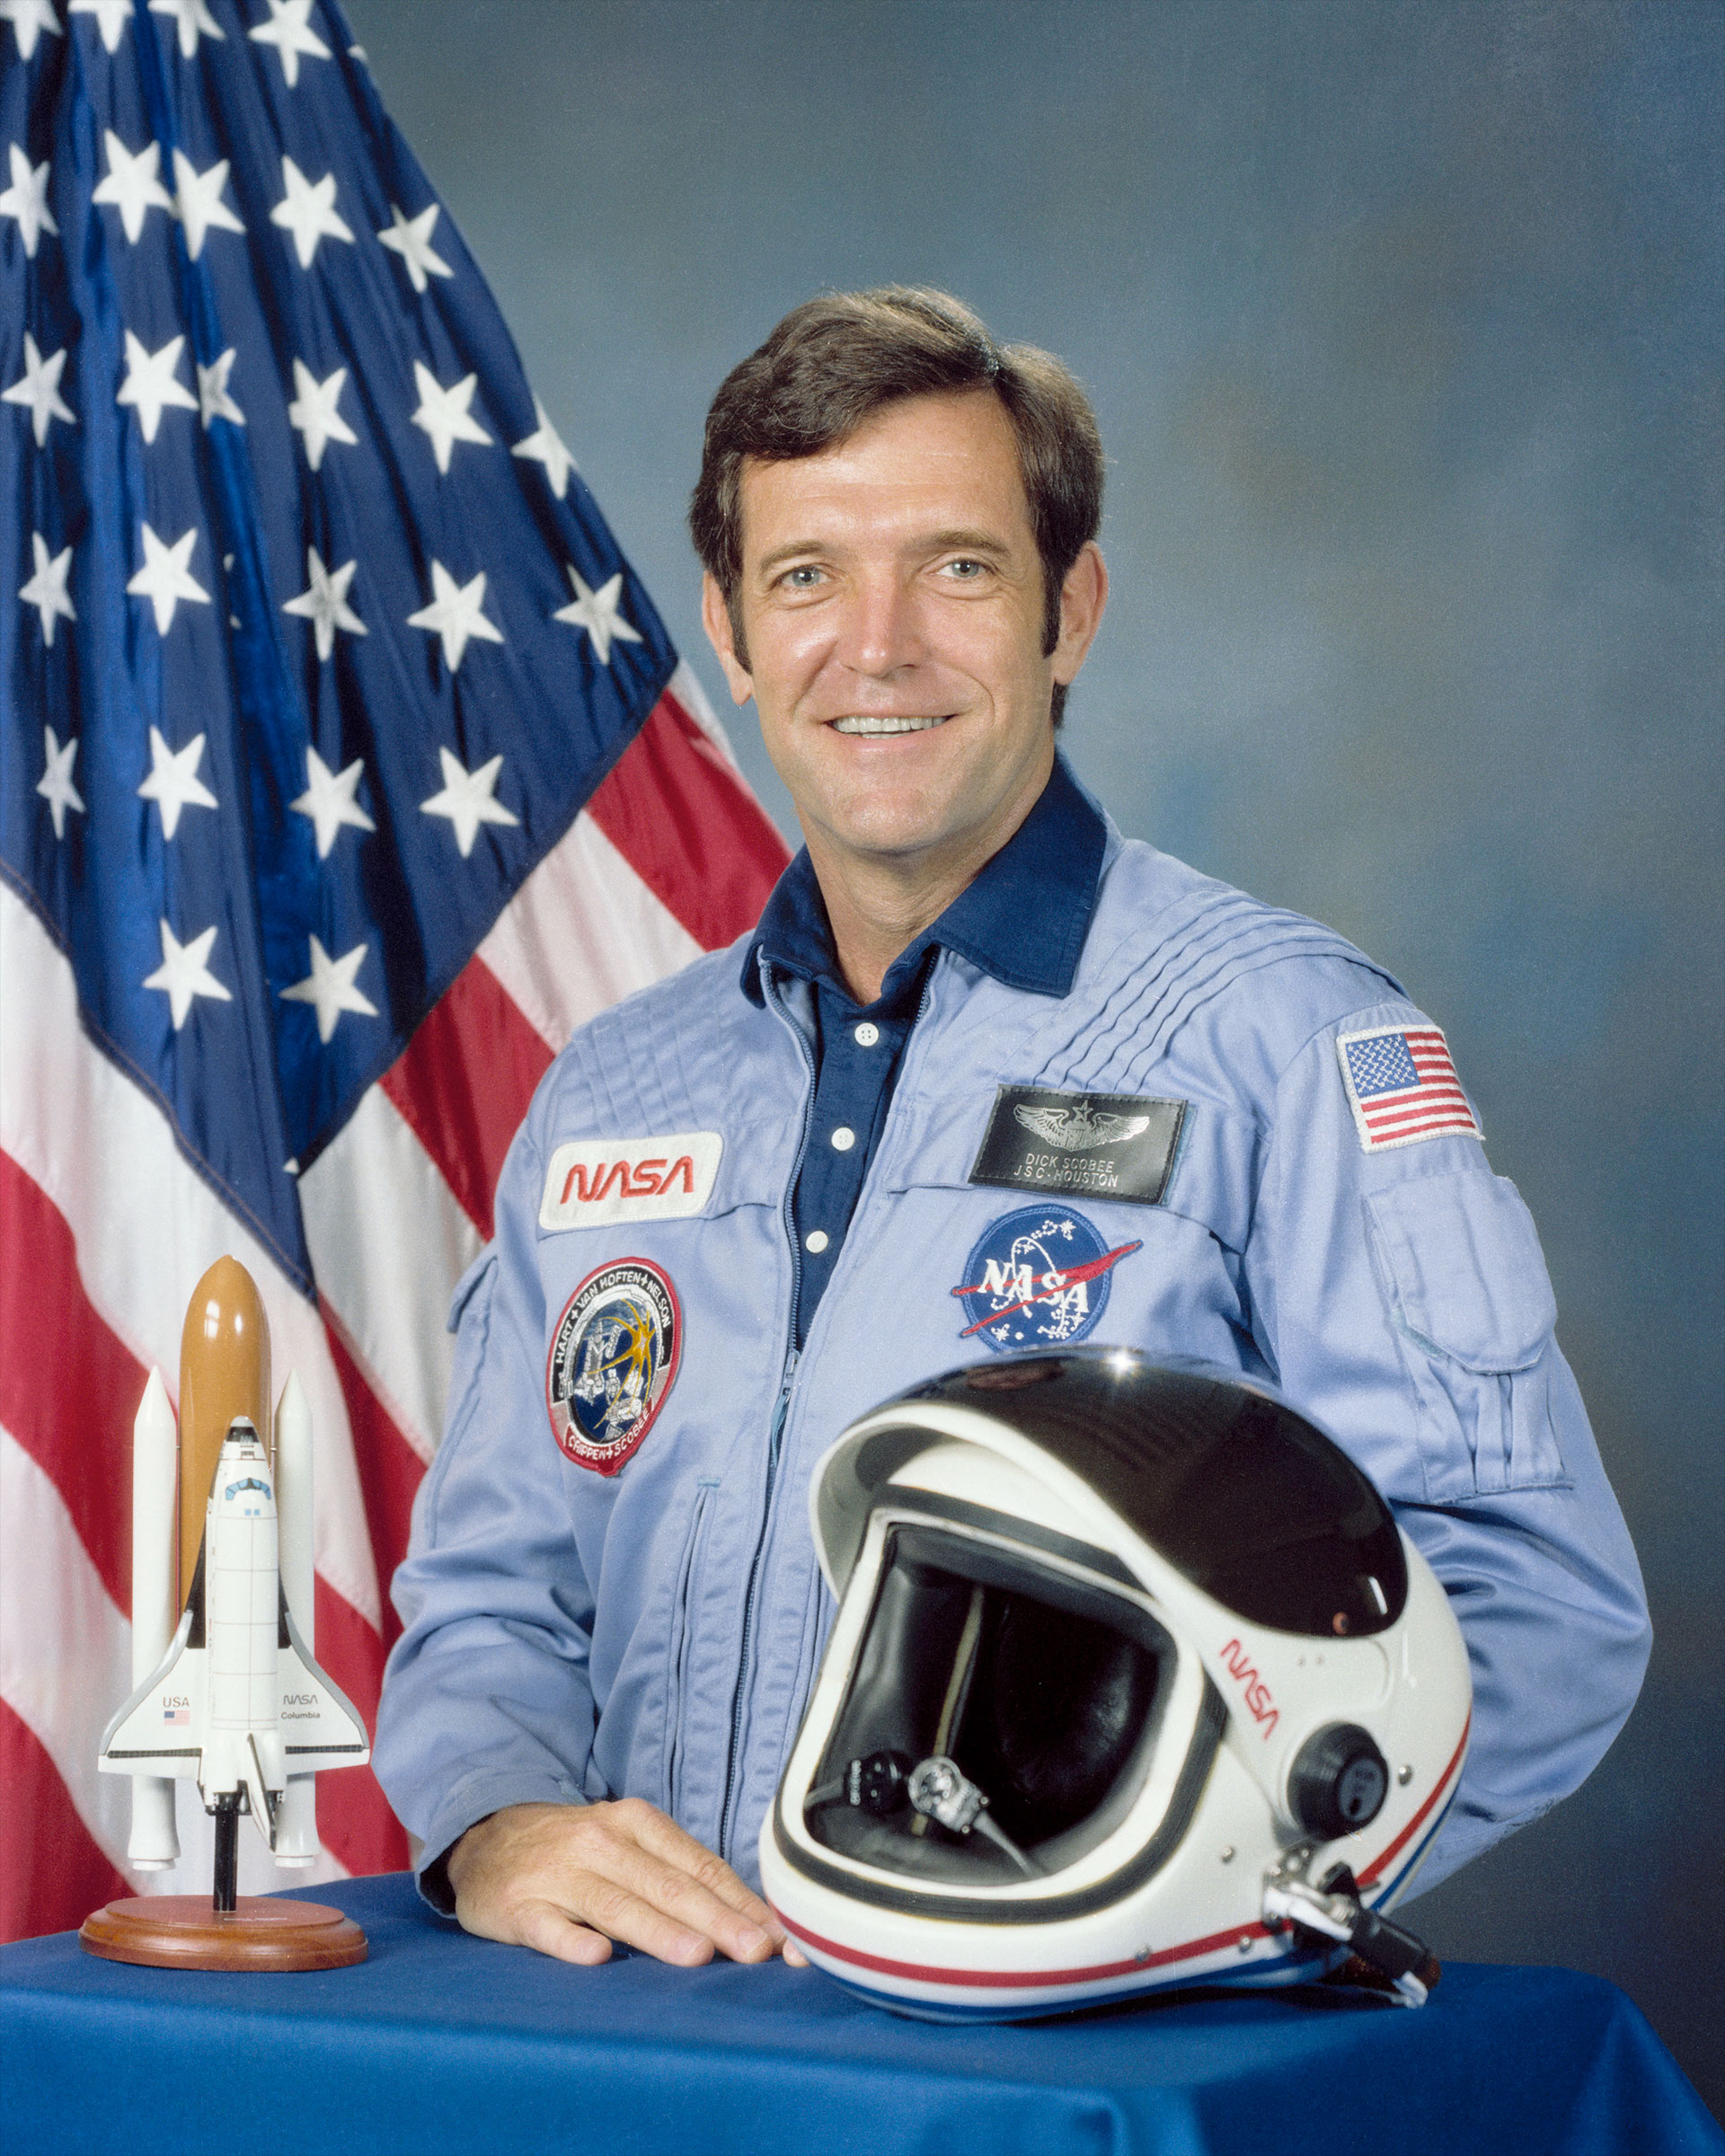 a man in a blue flight suit stands in front of an american flag